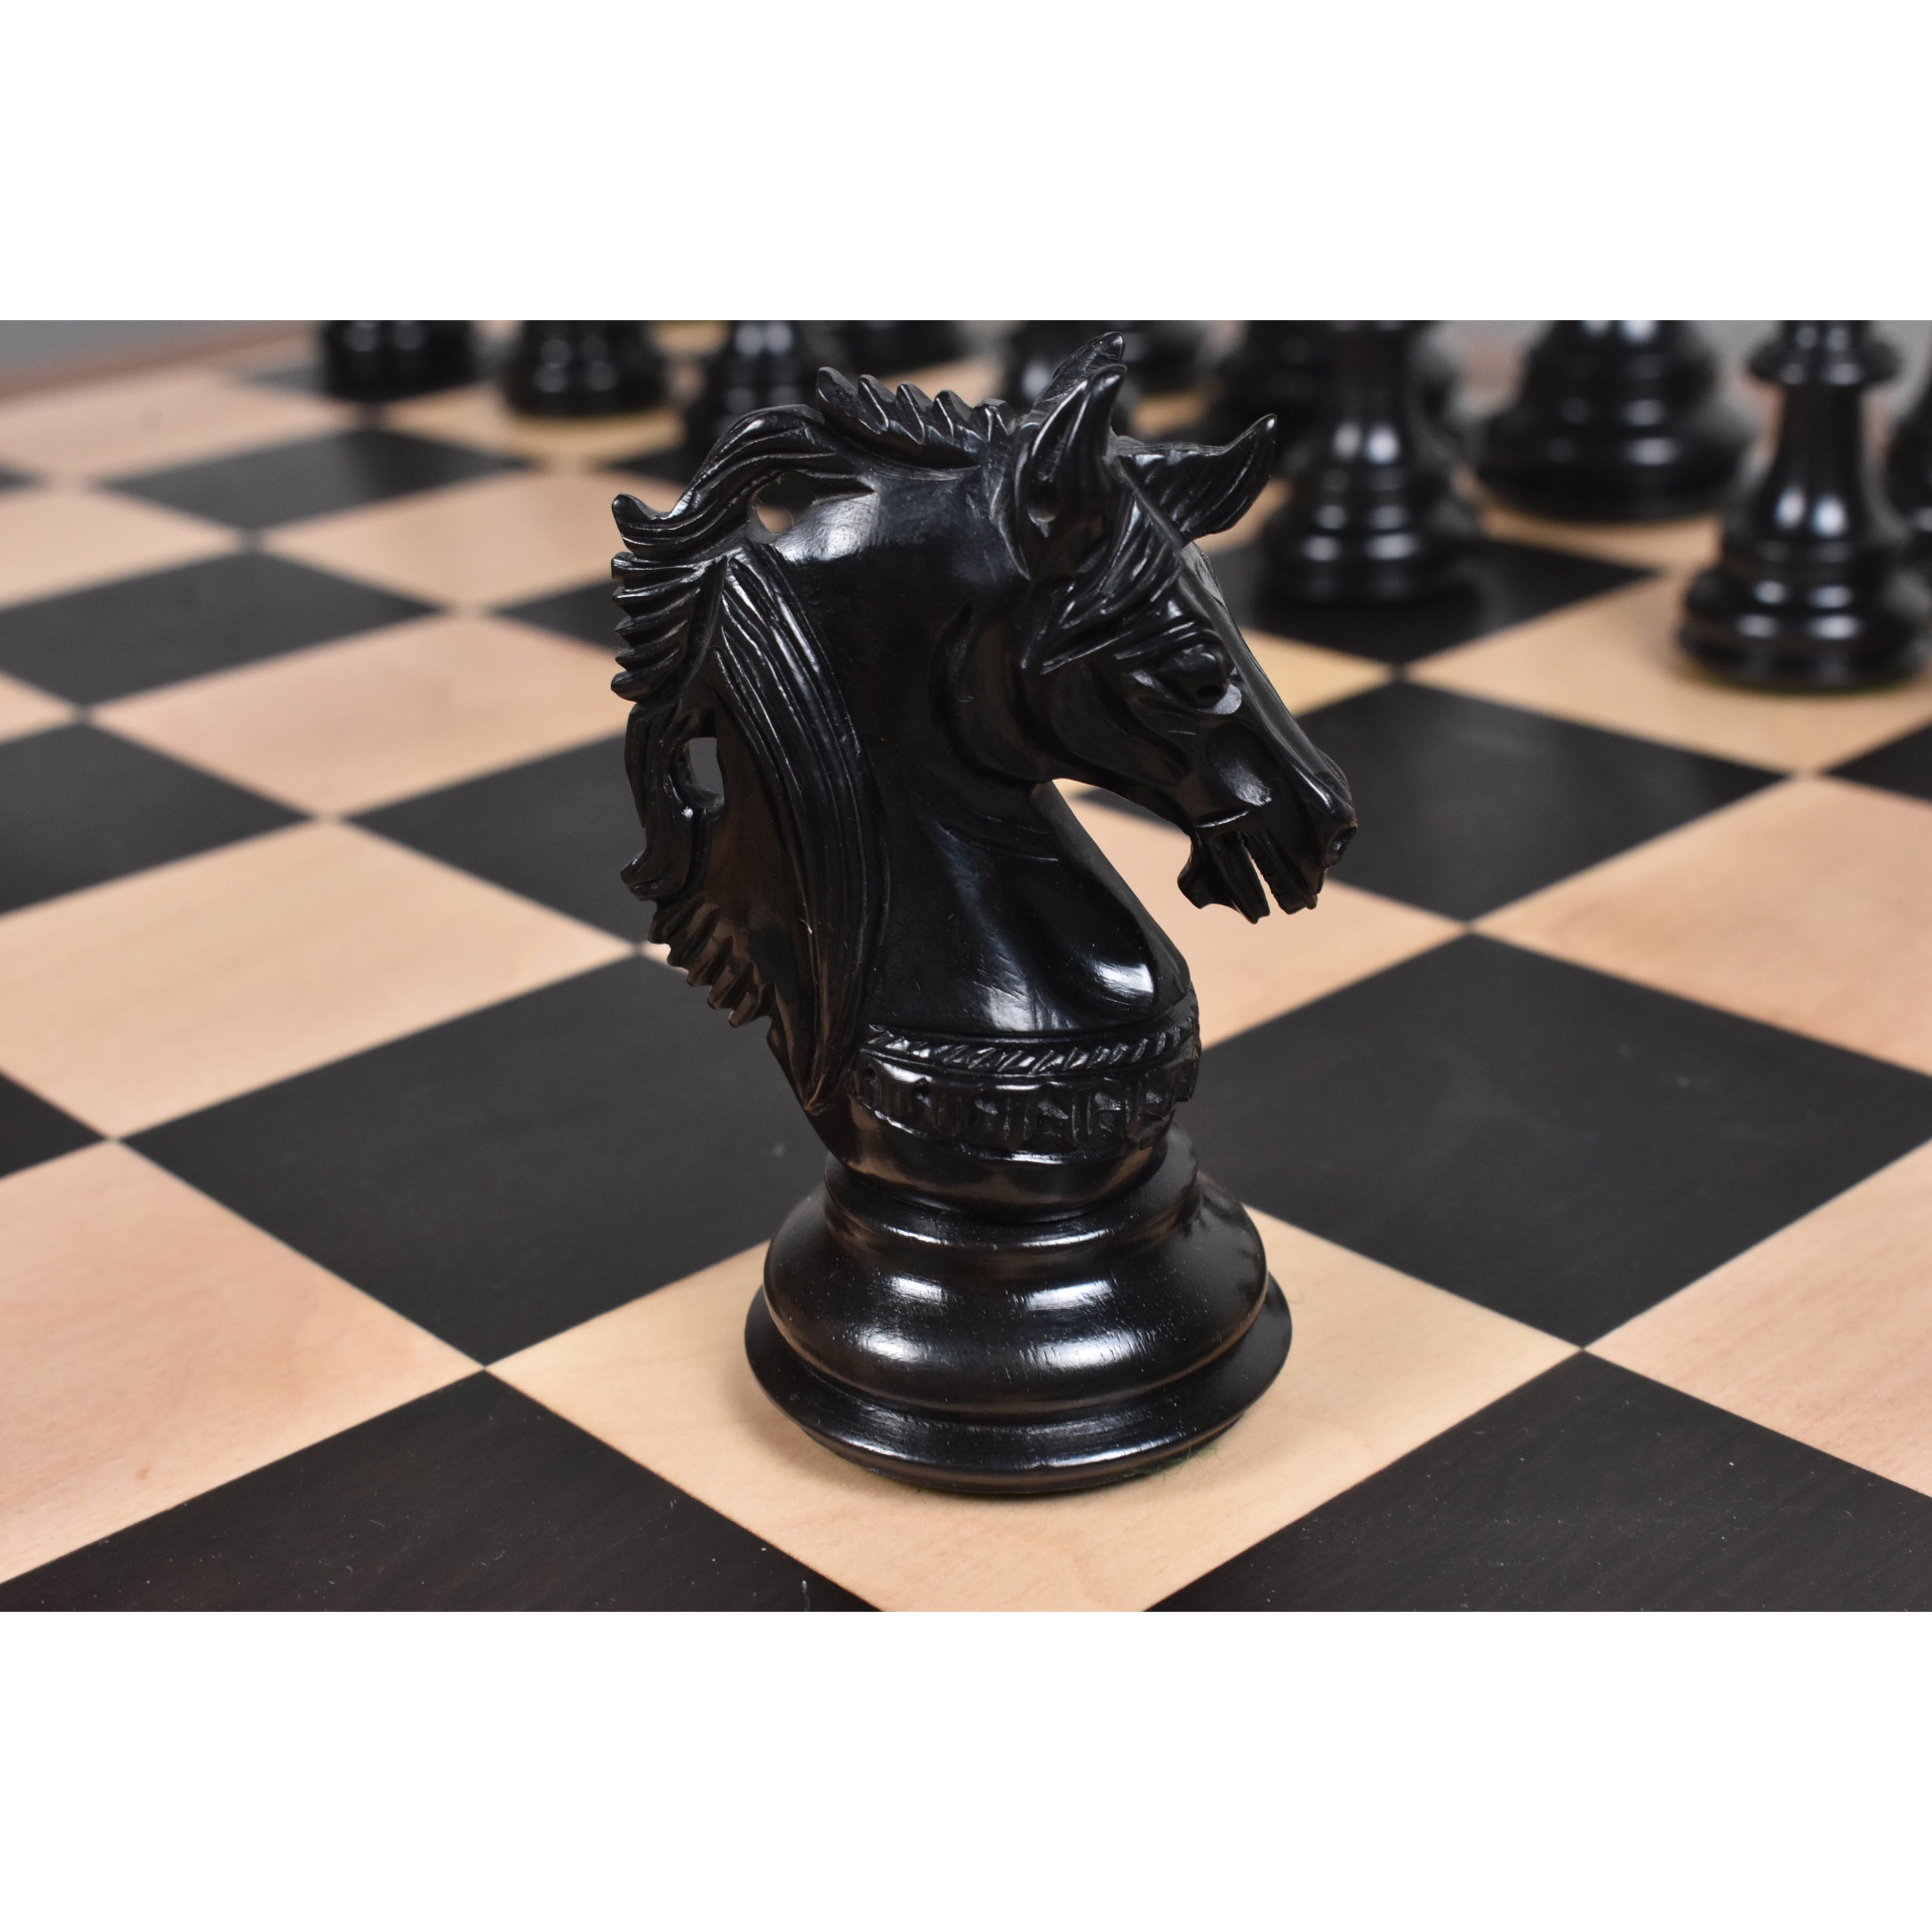 4.6" Prestige Luxury Staunton Chess Pieces Only set - Natural Ebony Wood - Triple Weighted